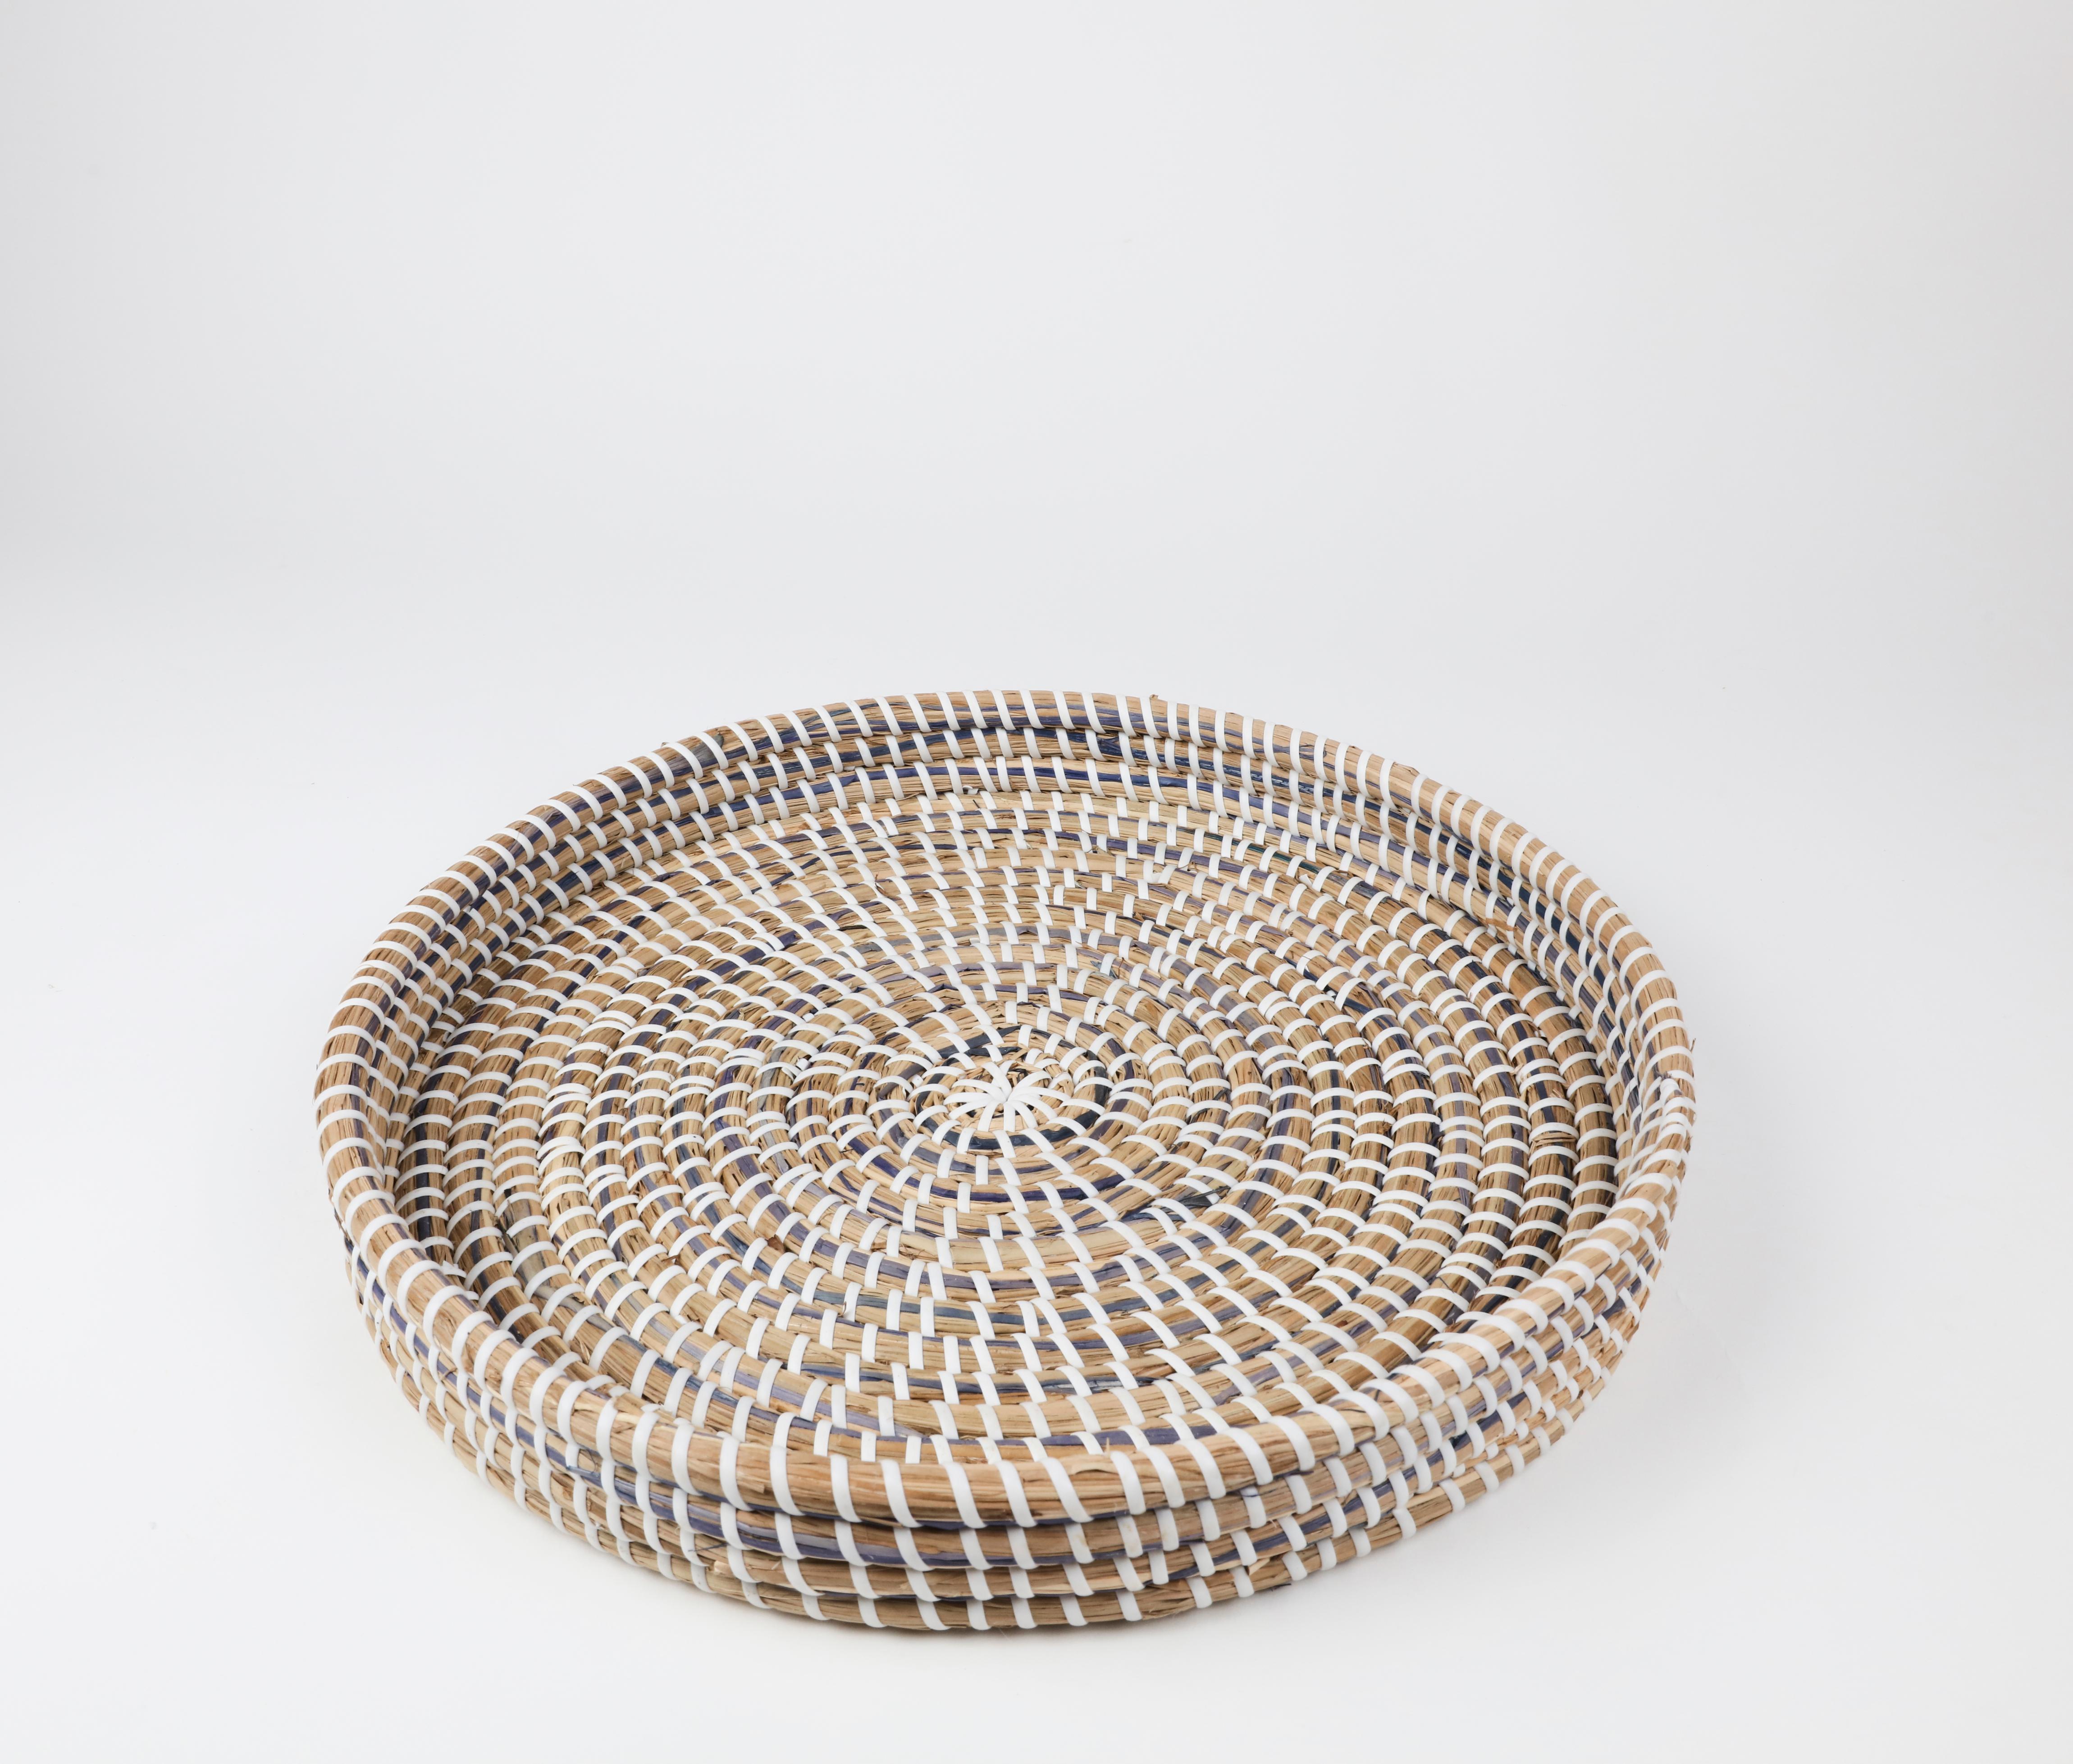 Pair of woven trays

Measures: 13.5